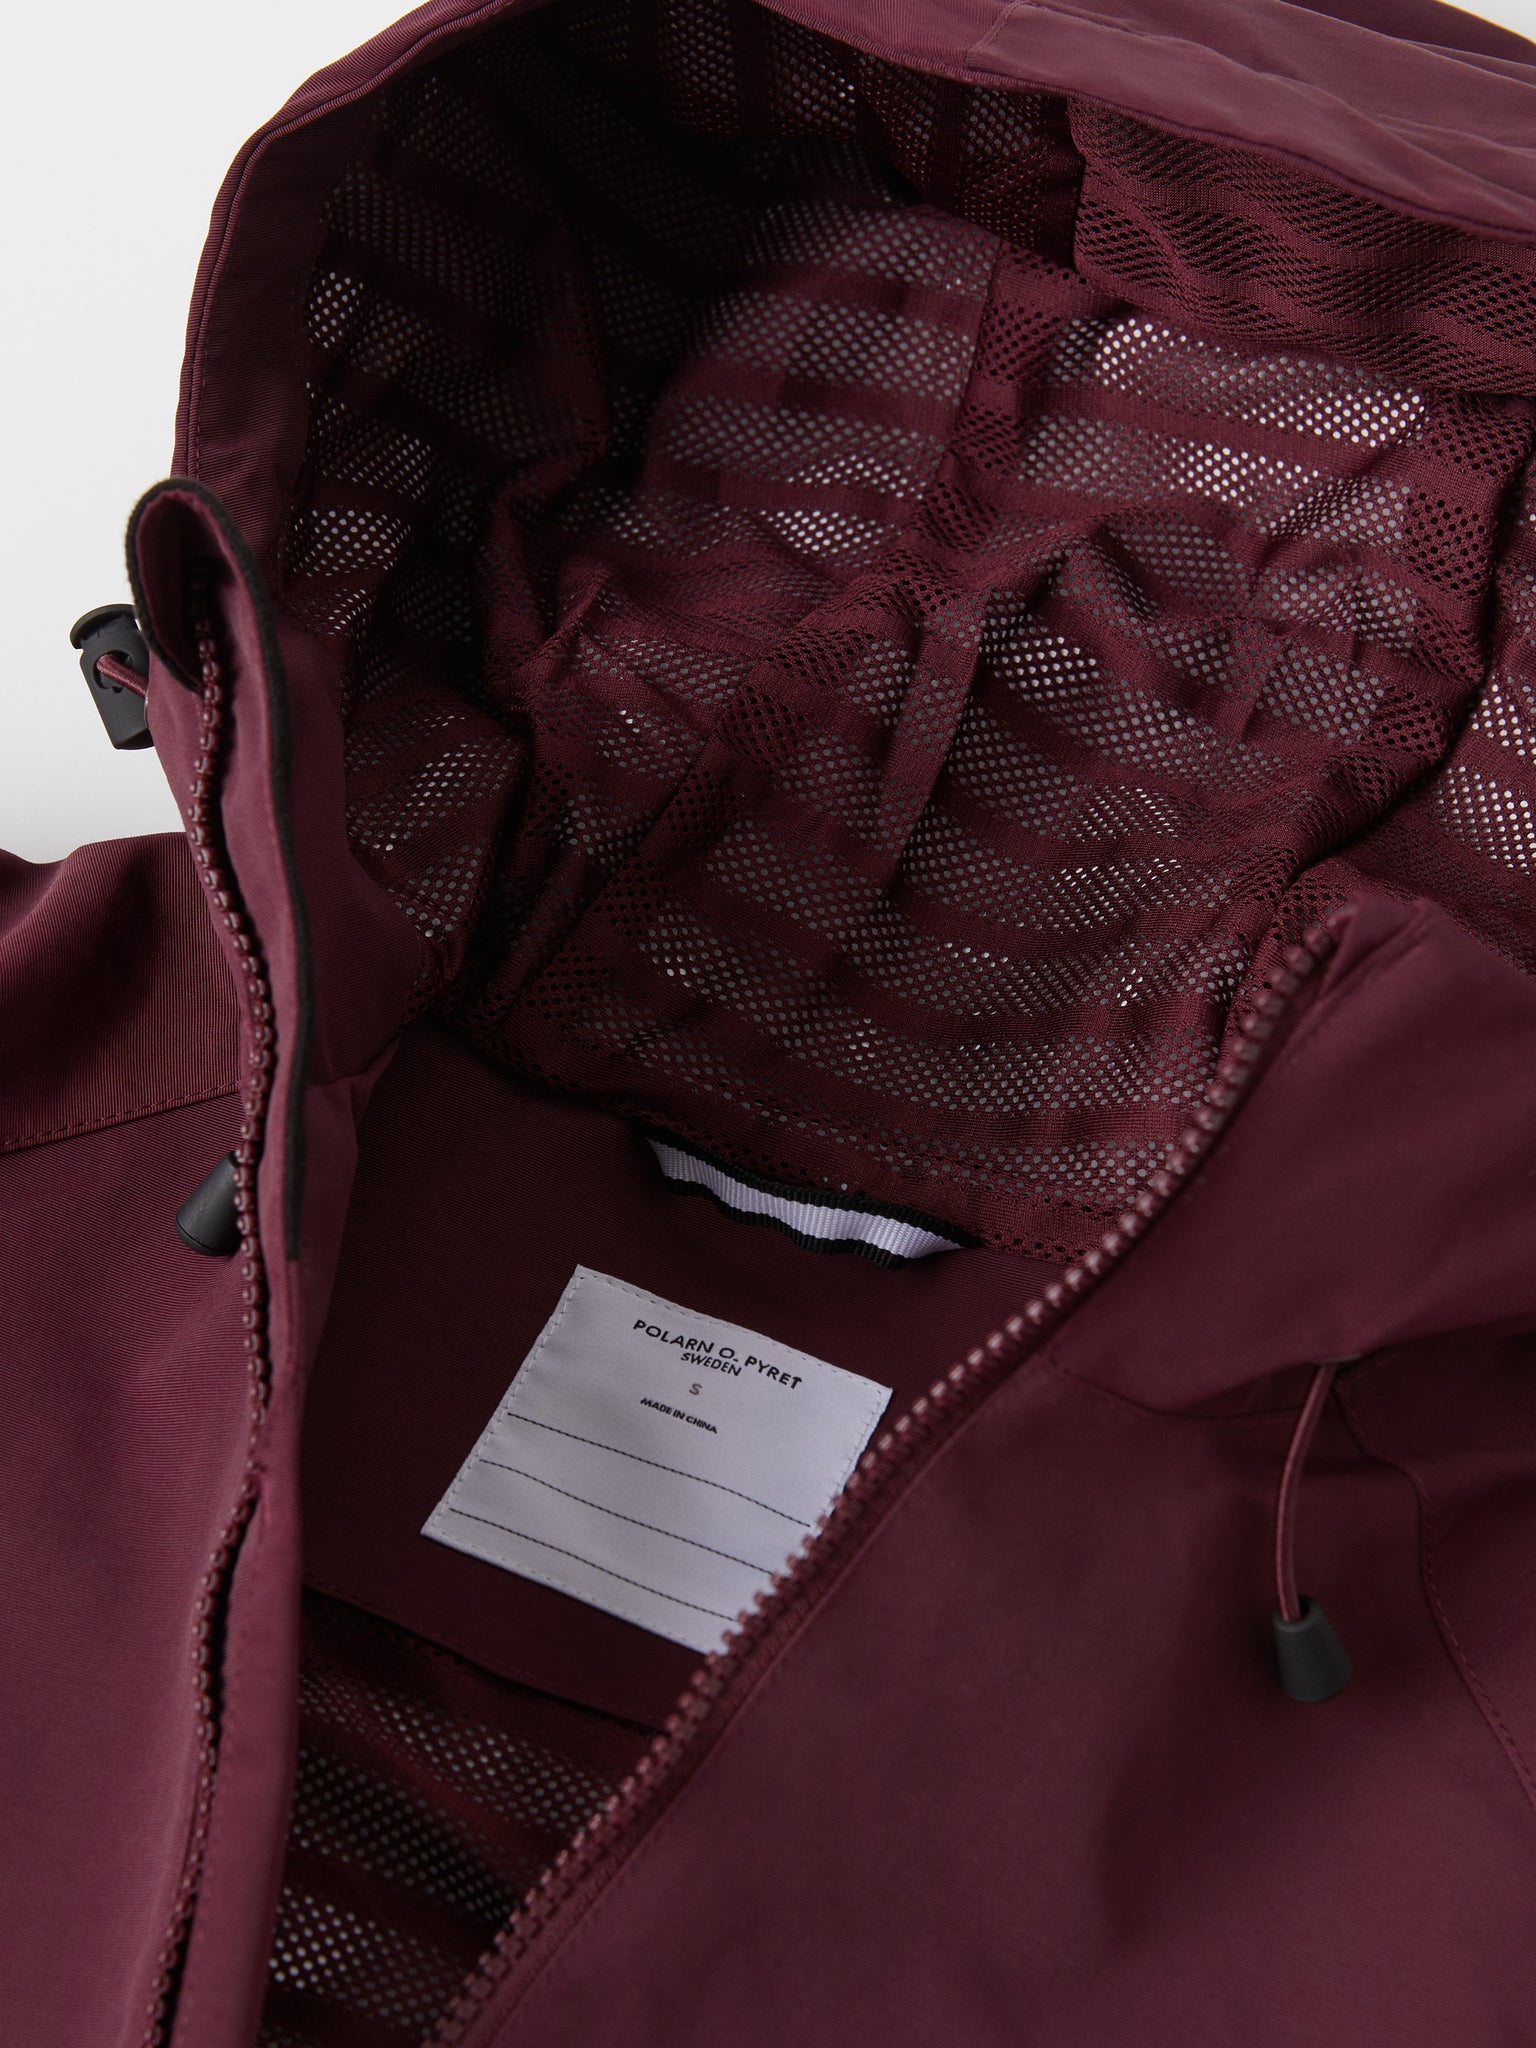 Burgundy Adult Waterproof Shell Jacket from the Polarn O. Pyret outerwear collection. The best ethical kids outerwear.